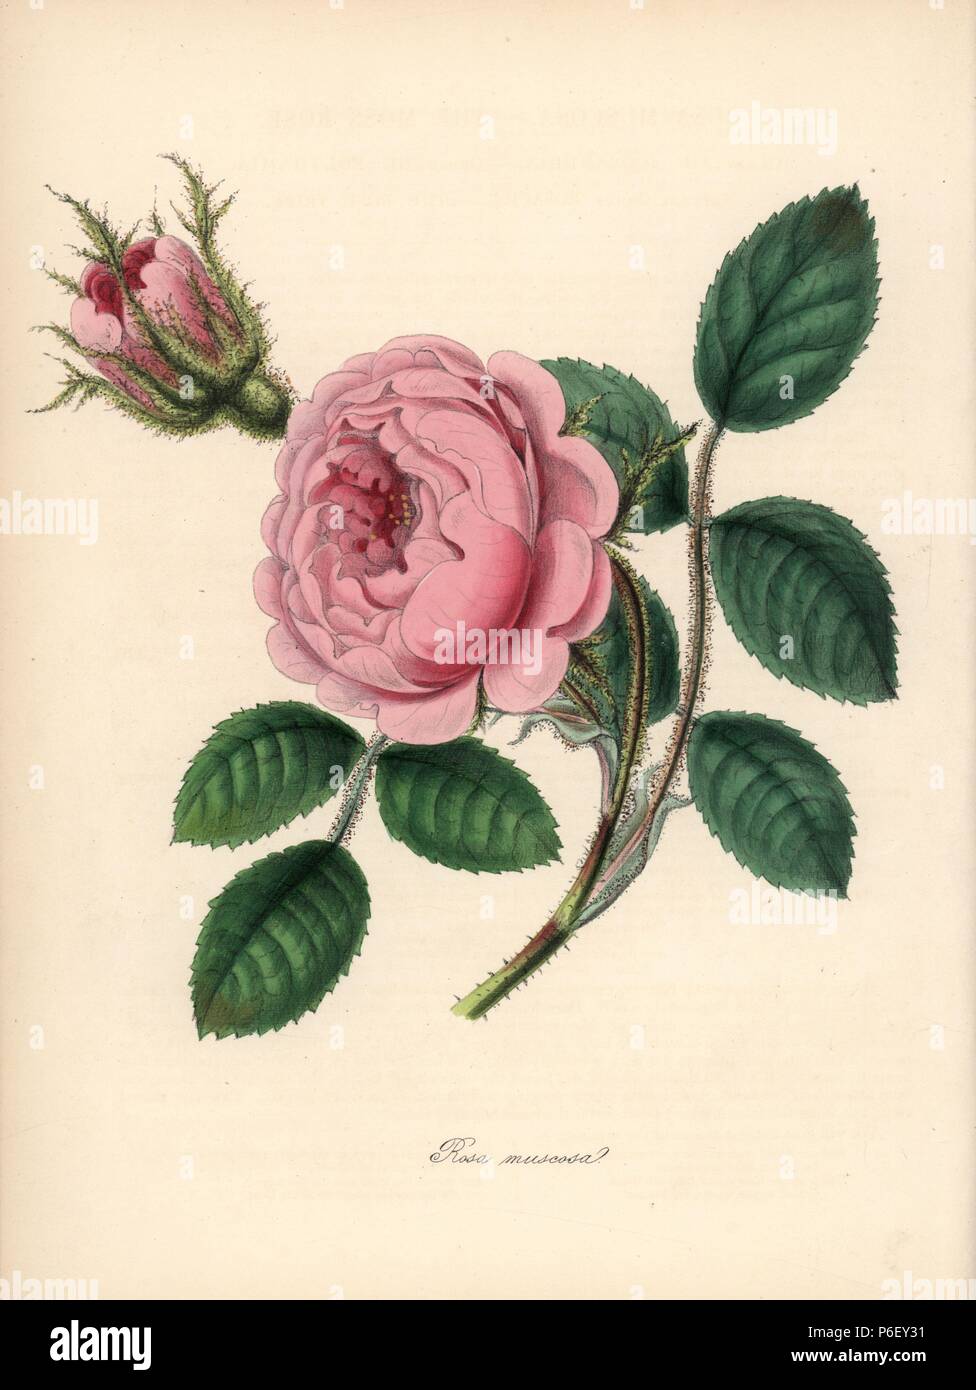 Moss rose, Rosa centifolia. Handcoloured zincograph by C. Chabot drawn by Miss M. A. Burnett from her 'Plantae Utiliores: or Illustrations of Useful Plants,' Whittaker, London, 1842. Miss Burnett drew the botanical illustrations, but the text was chiefly by her late brother, British botanist Gilbert Thomas Burnett (1800-1835). Stock Photo